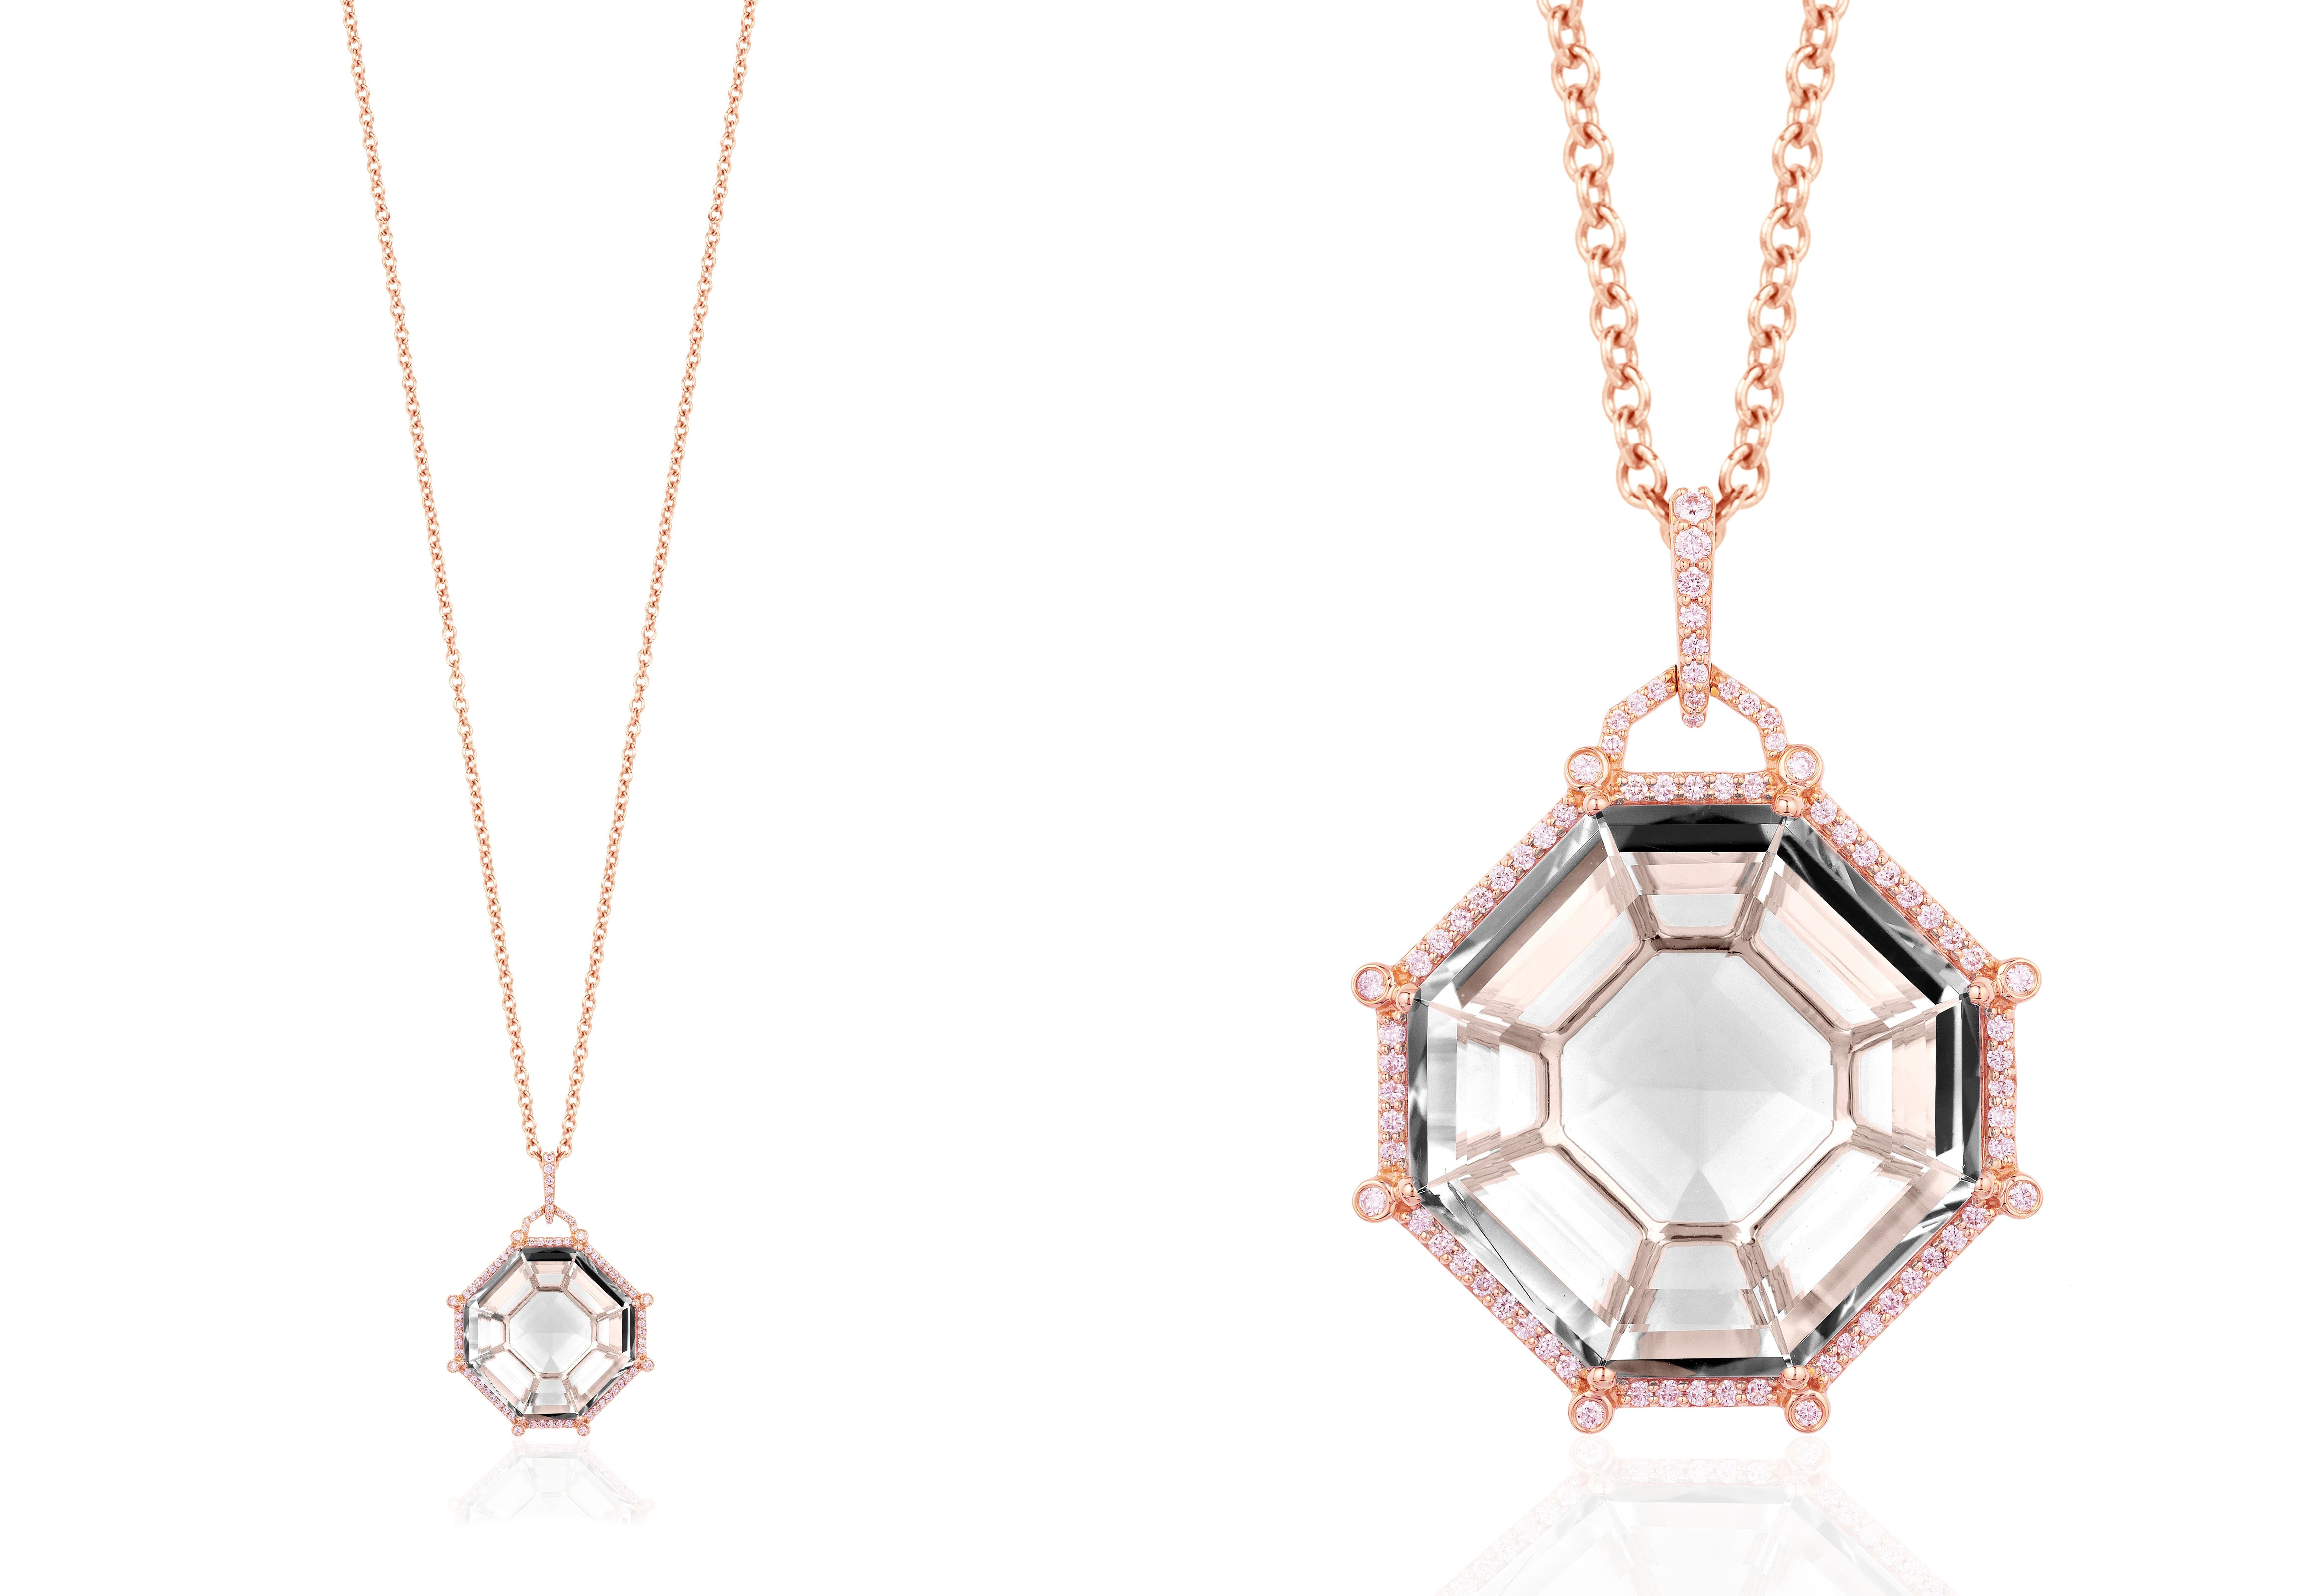 Gossip' Rock Crystal Octagon Pendant  with Diamonds in 18K 
Stone Size: 22.5 x 22.5 mm
Diamonds: G-H / VS, Approx Wt: 0.46 Cts